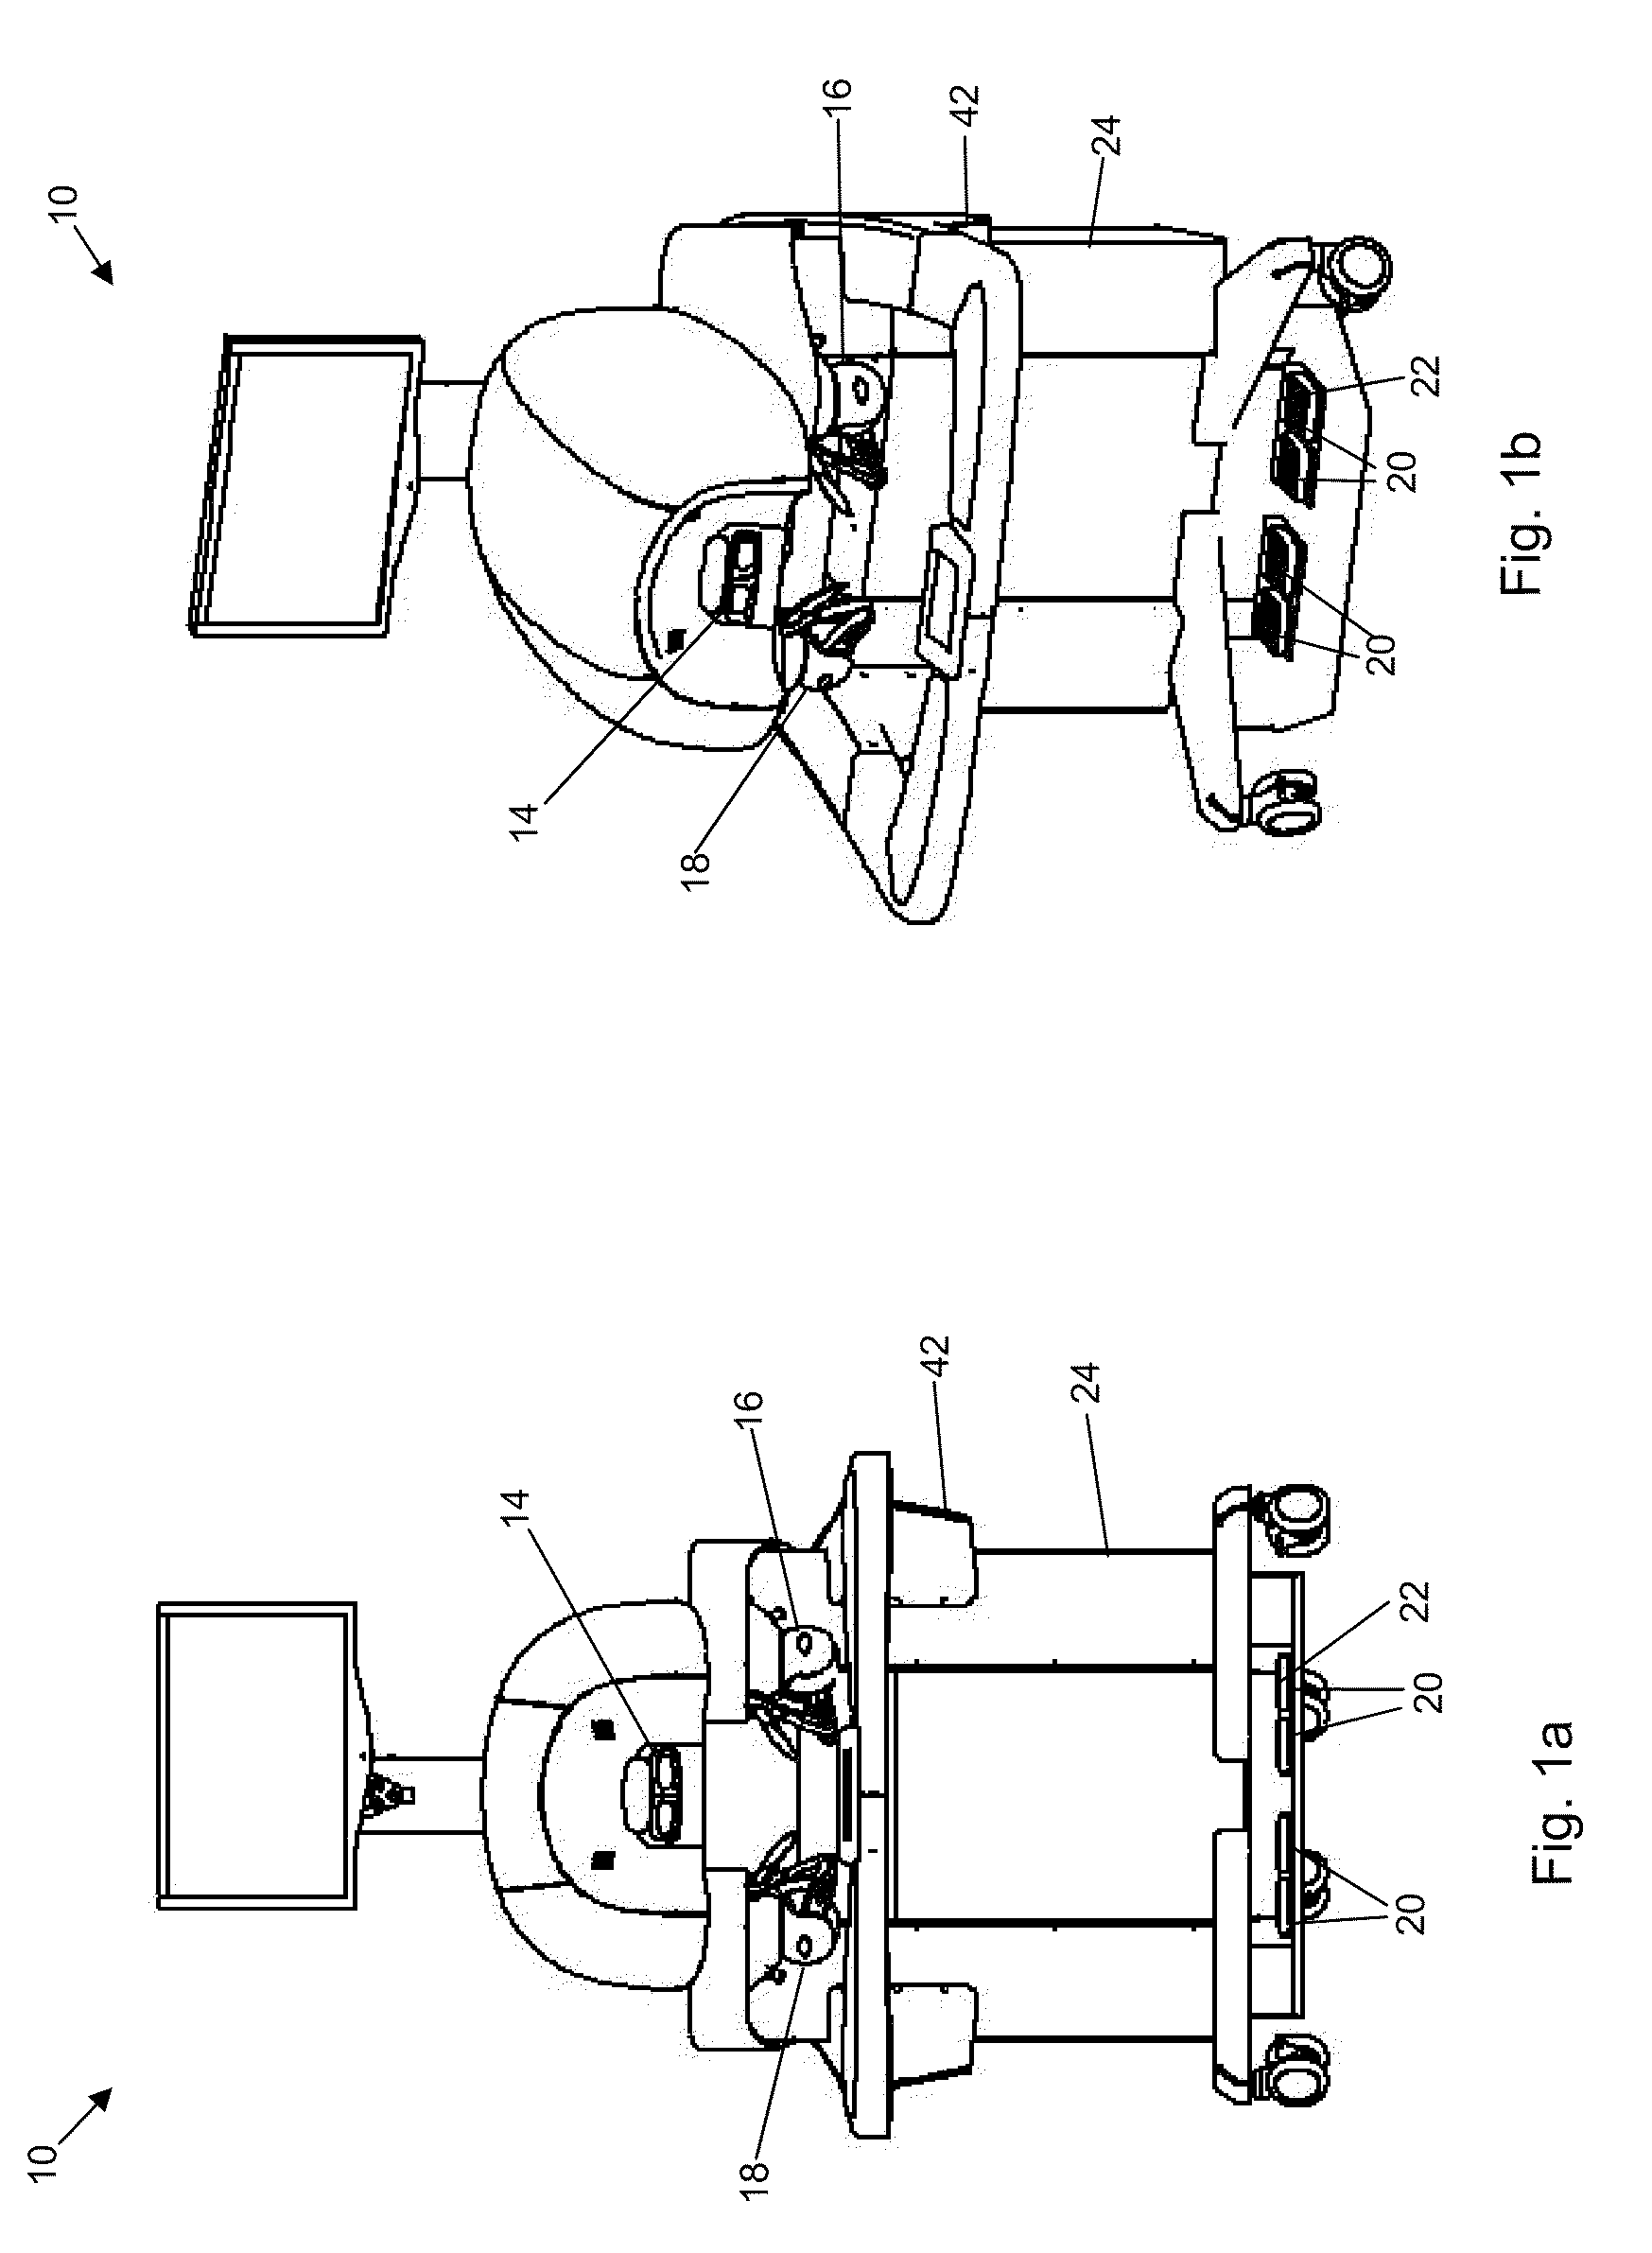 Method And System For Minimally-Invasive Surgery Training